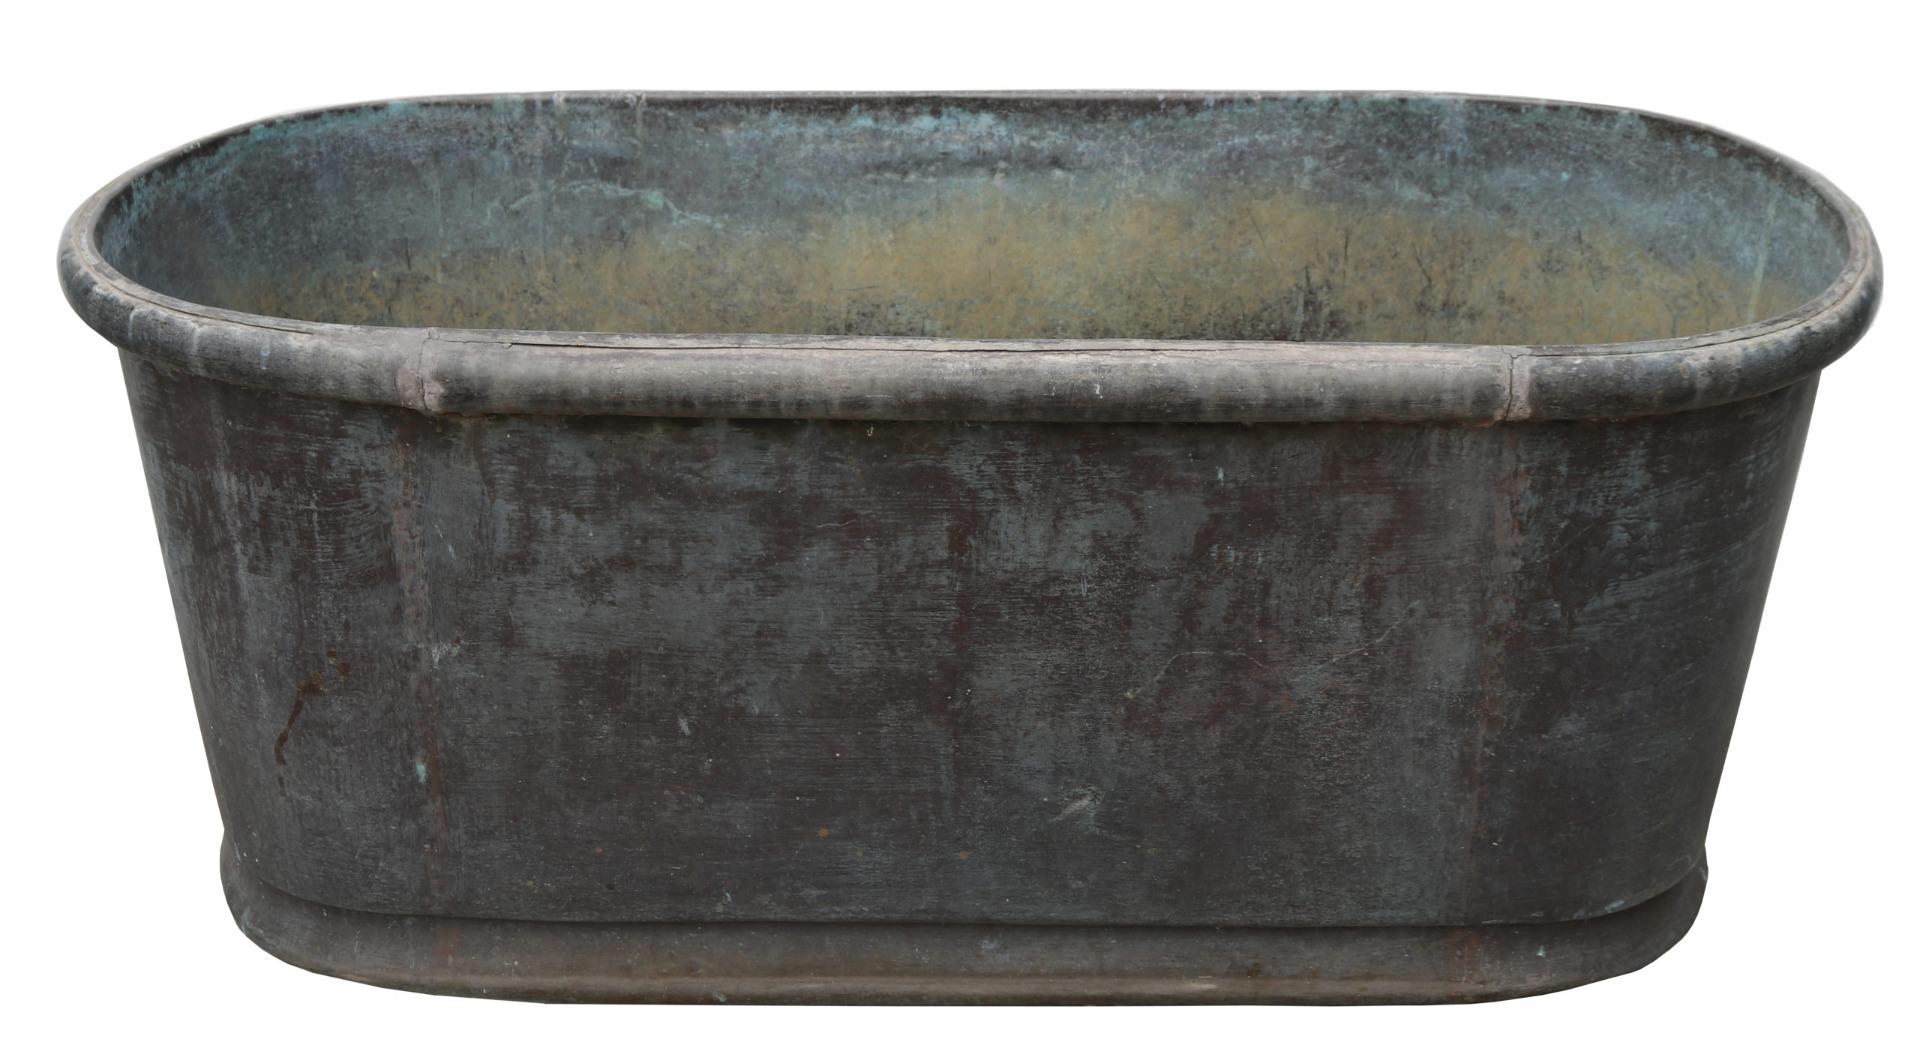 A reclaimed copper bathtub with a weathered verdigris finish and rolled top.